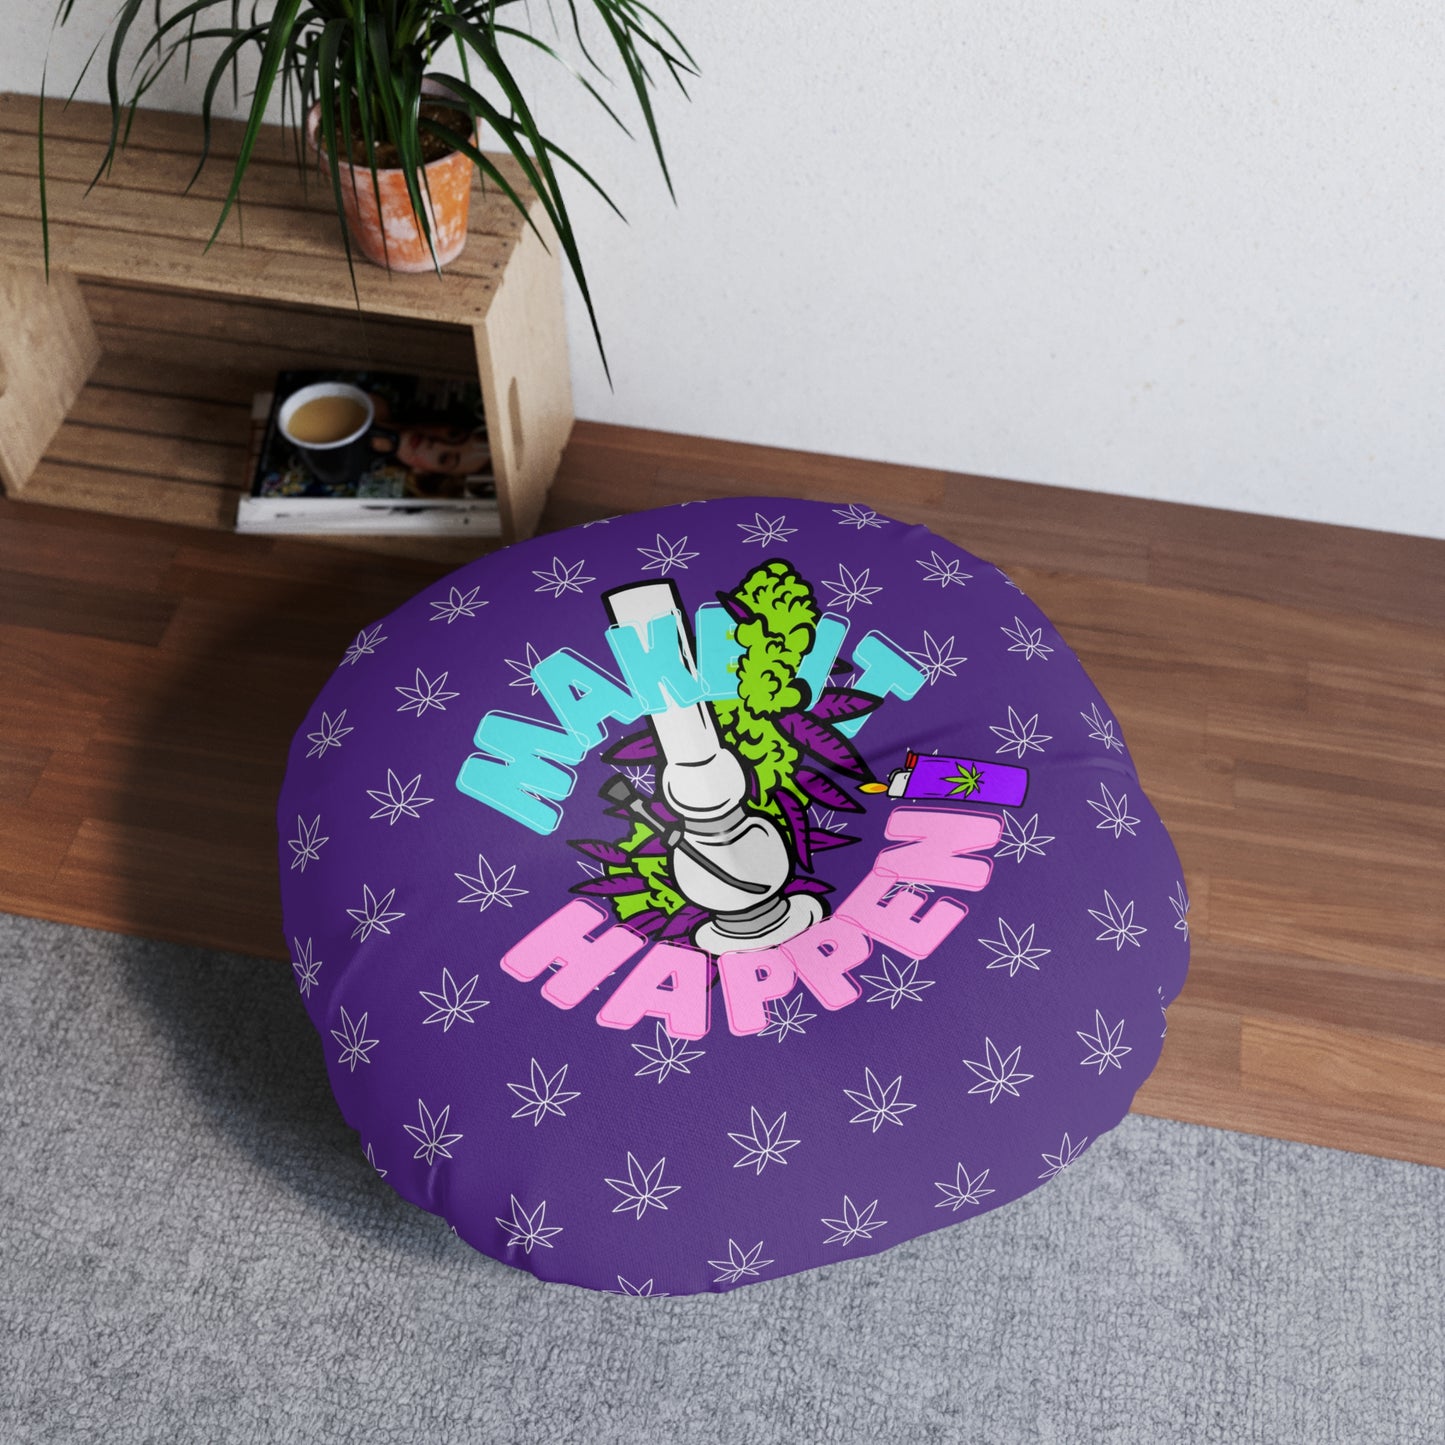 A round purple Make It Happen Cannabis, Bong, & Lighter custom floor pillow with a colorful design featuring the text "make it happen" and an illustration of a hand holding a smoking joint, placed on a wooden floor near a shelf with a plant